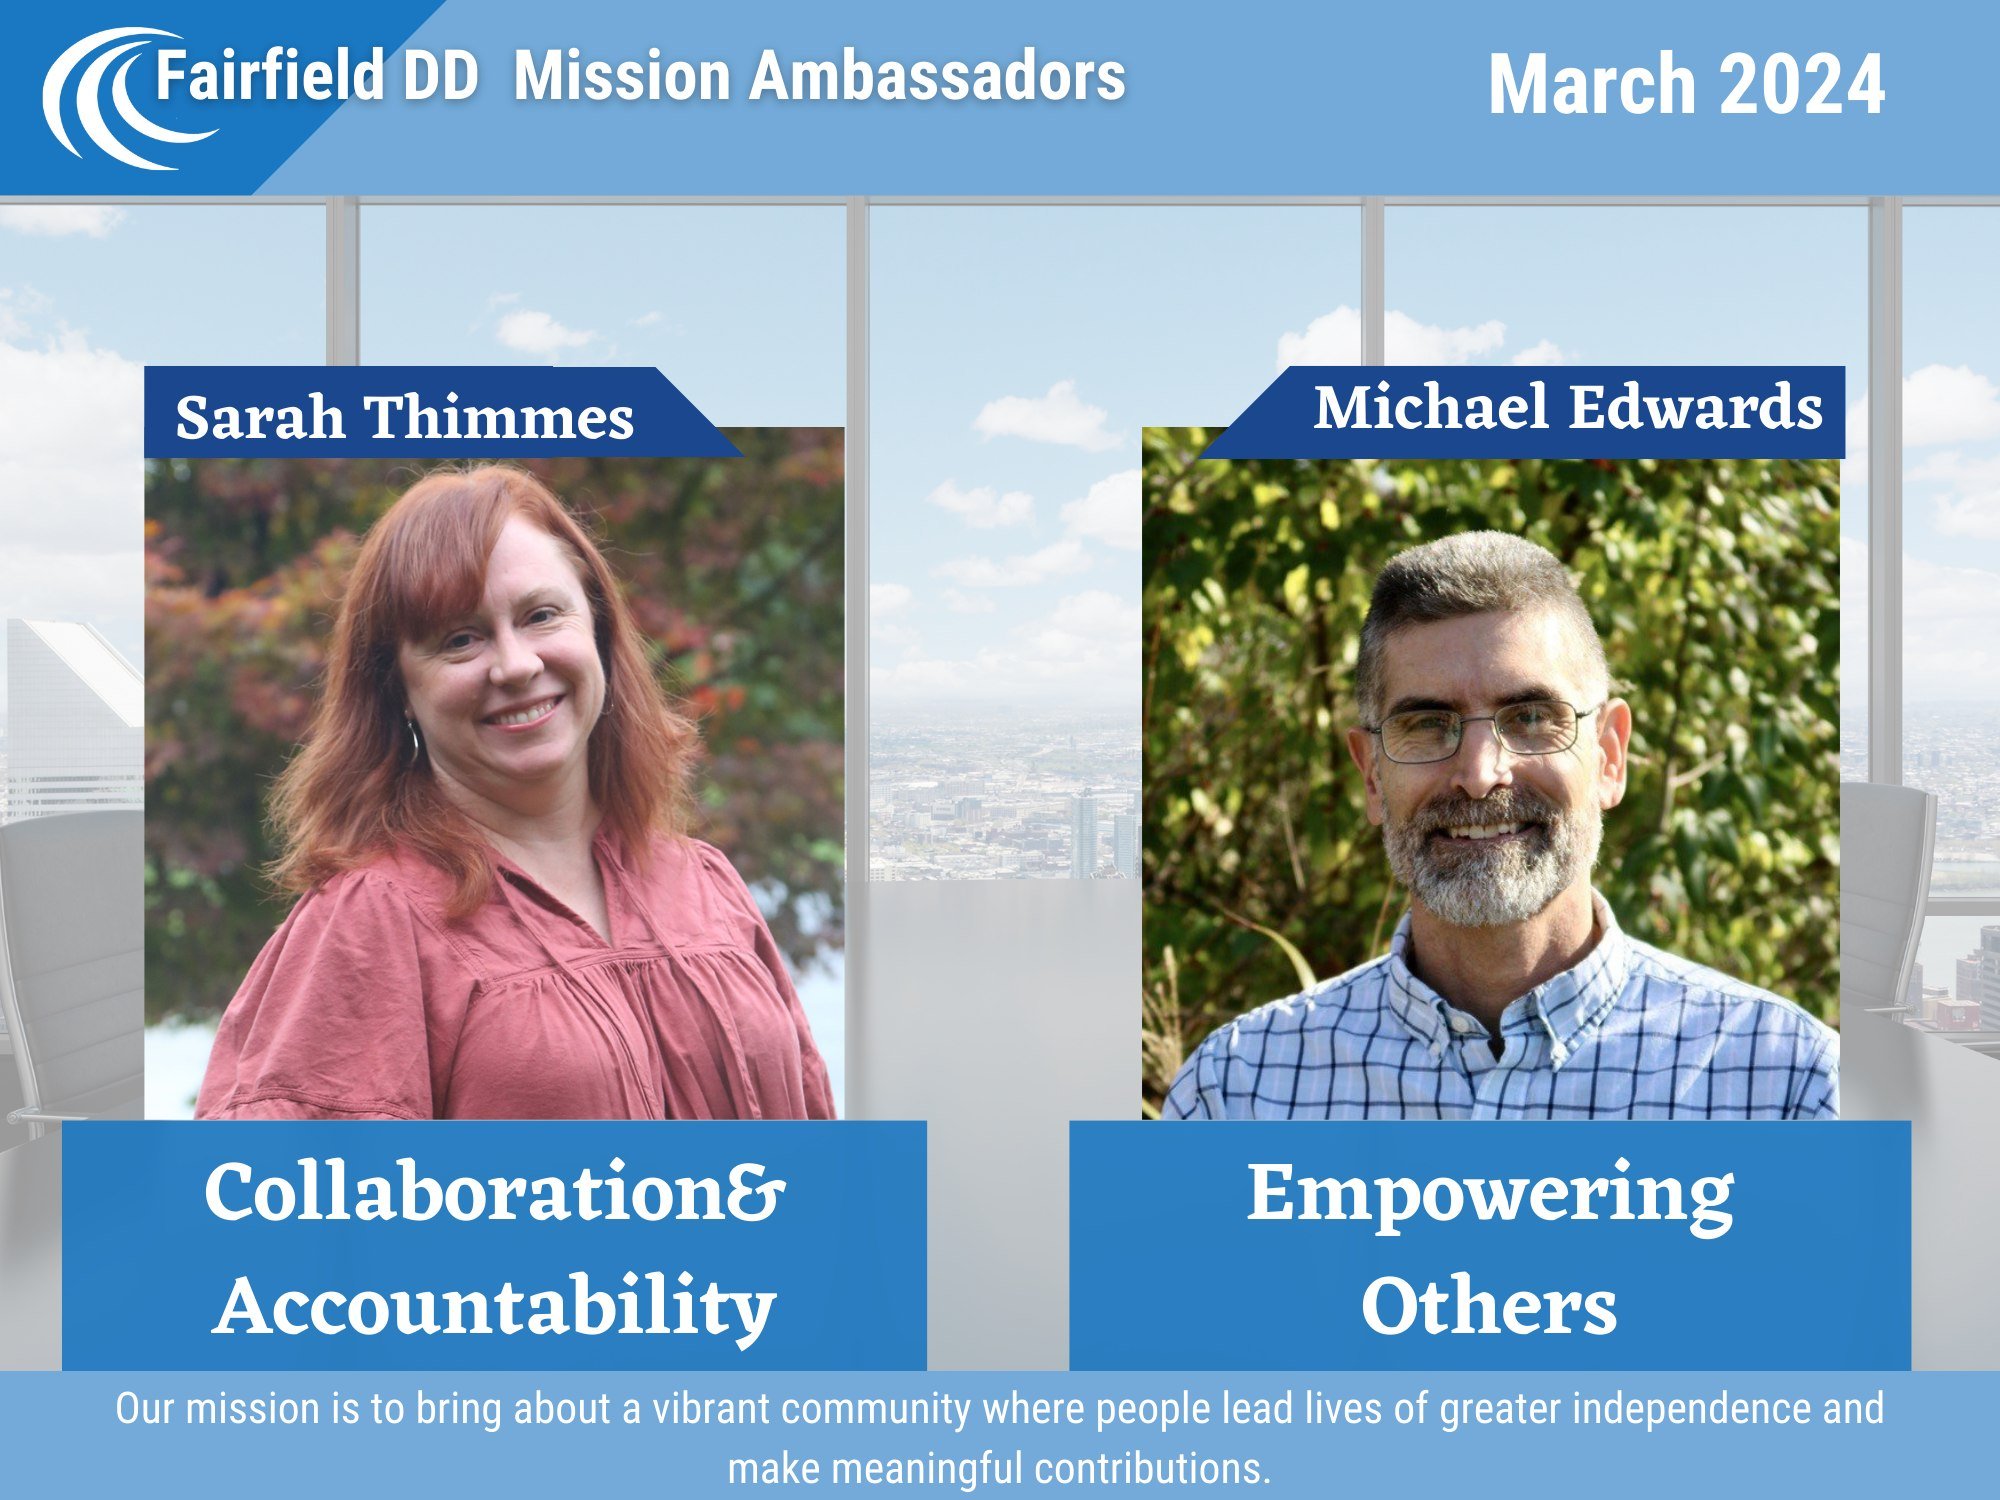 Fairfield DD is excited to recognize and honor employees who embody our mission. Let's give a big round of applause to the March Mission Ambassadors! To learn more about their nominations and how they are making a difference in our mission, check out